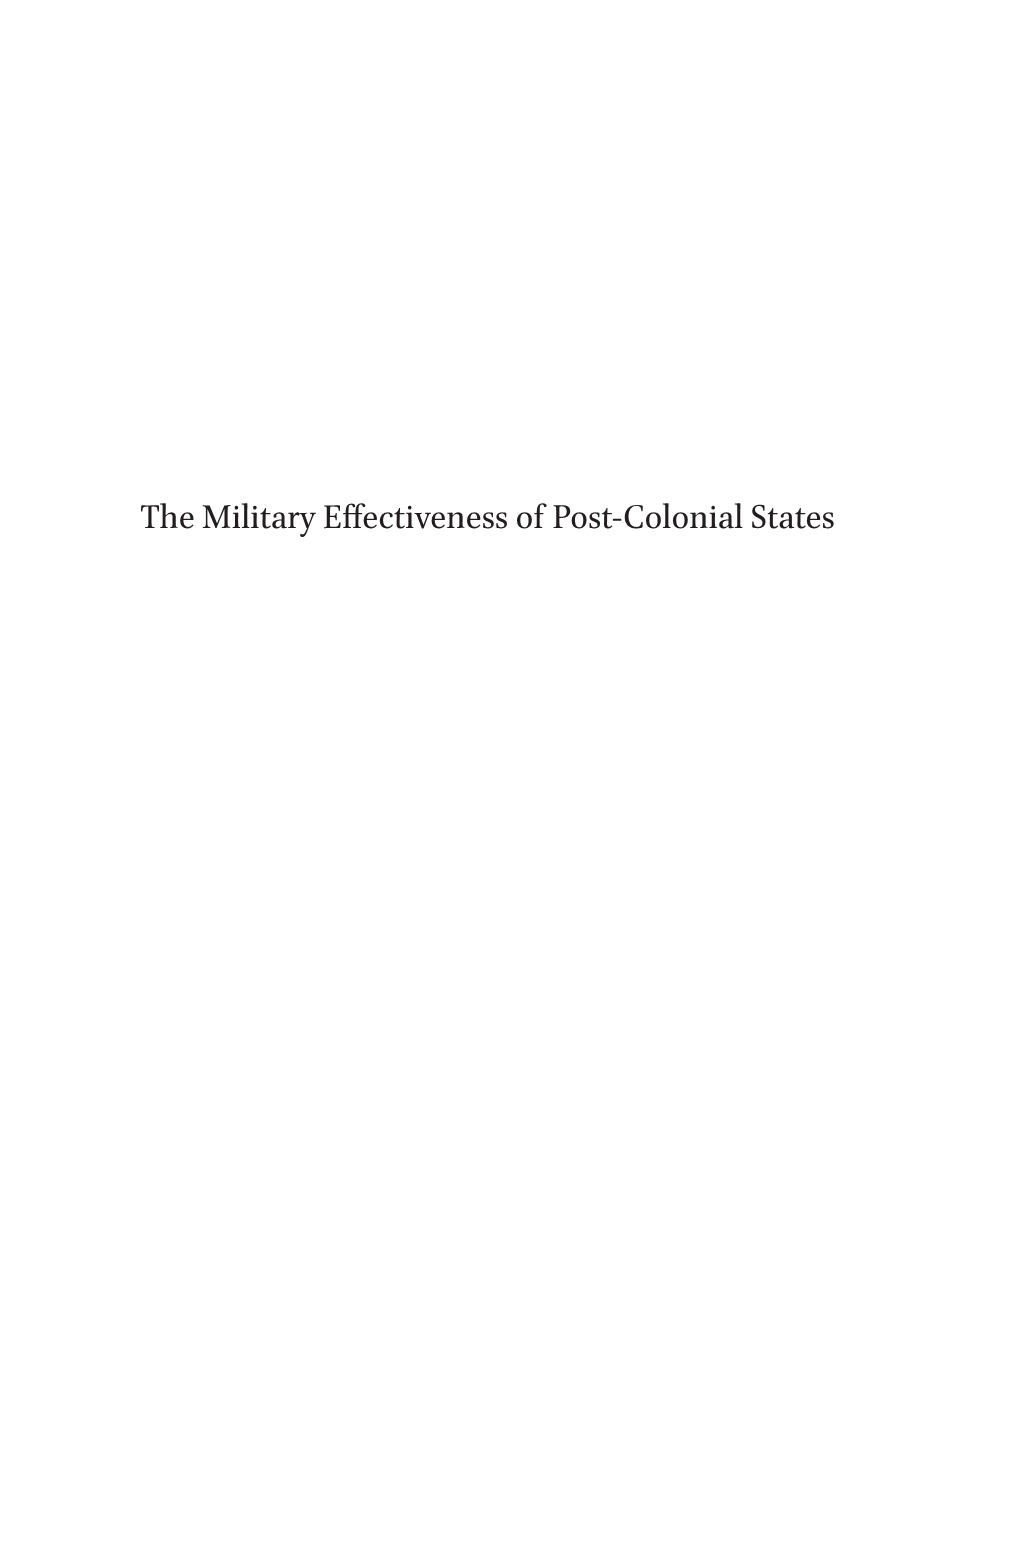 The Military Effectiveness of Post-Colonial States Ii Contents History of Warfare